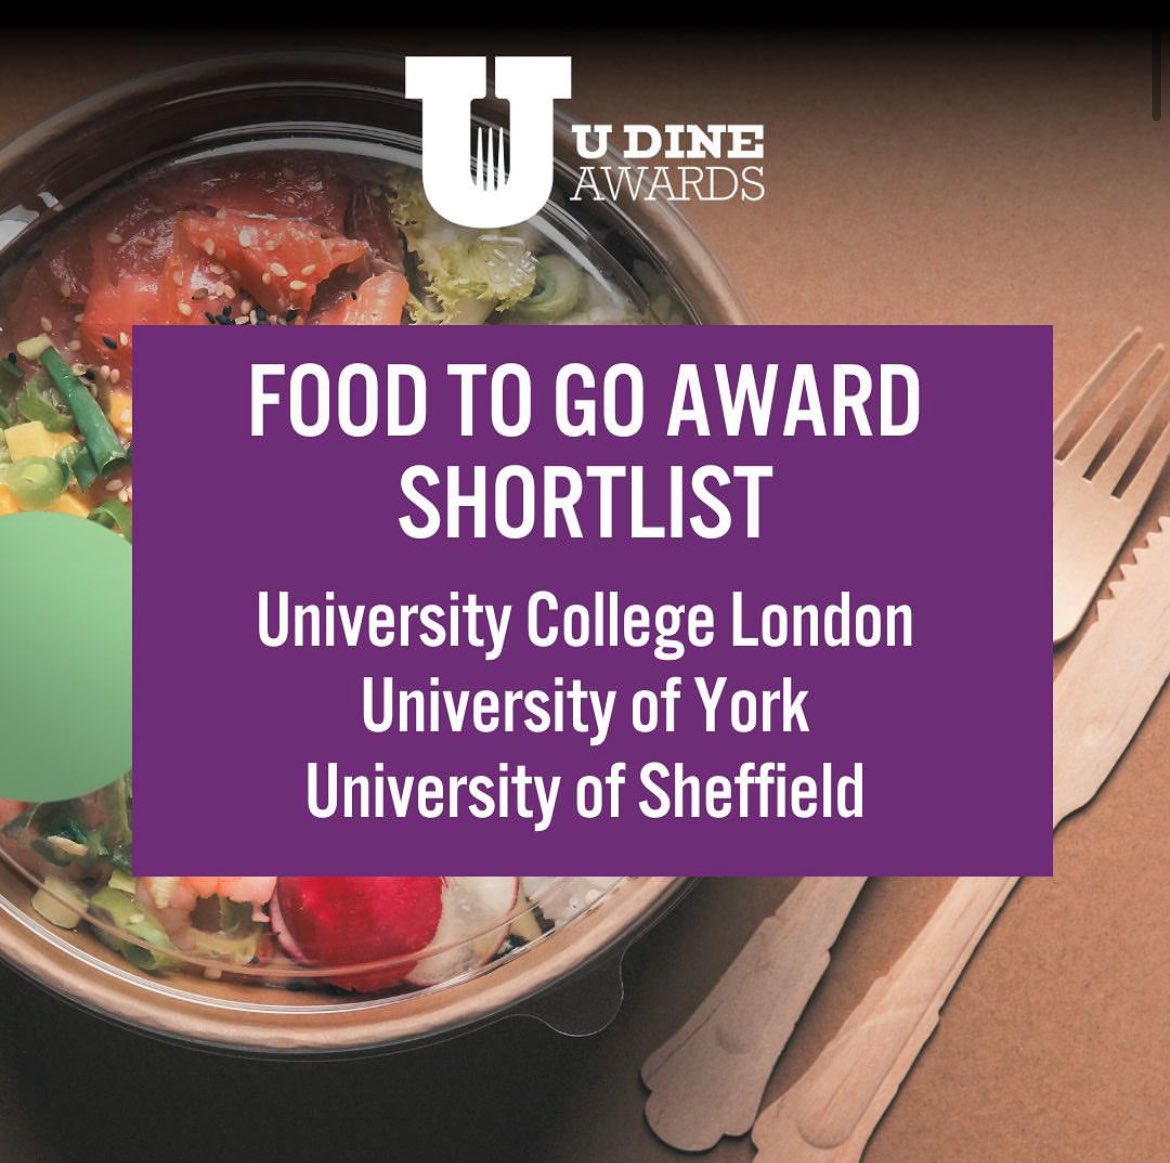 Looking forward to the @udineawards taking place @imagovenues on 6 June : shortlist for Food To Go 👍🏻